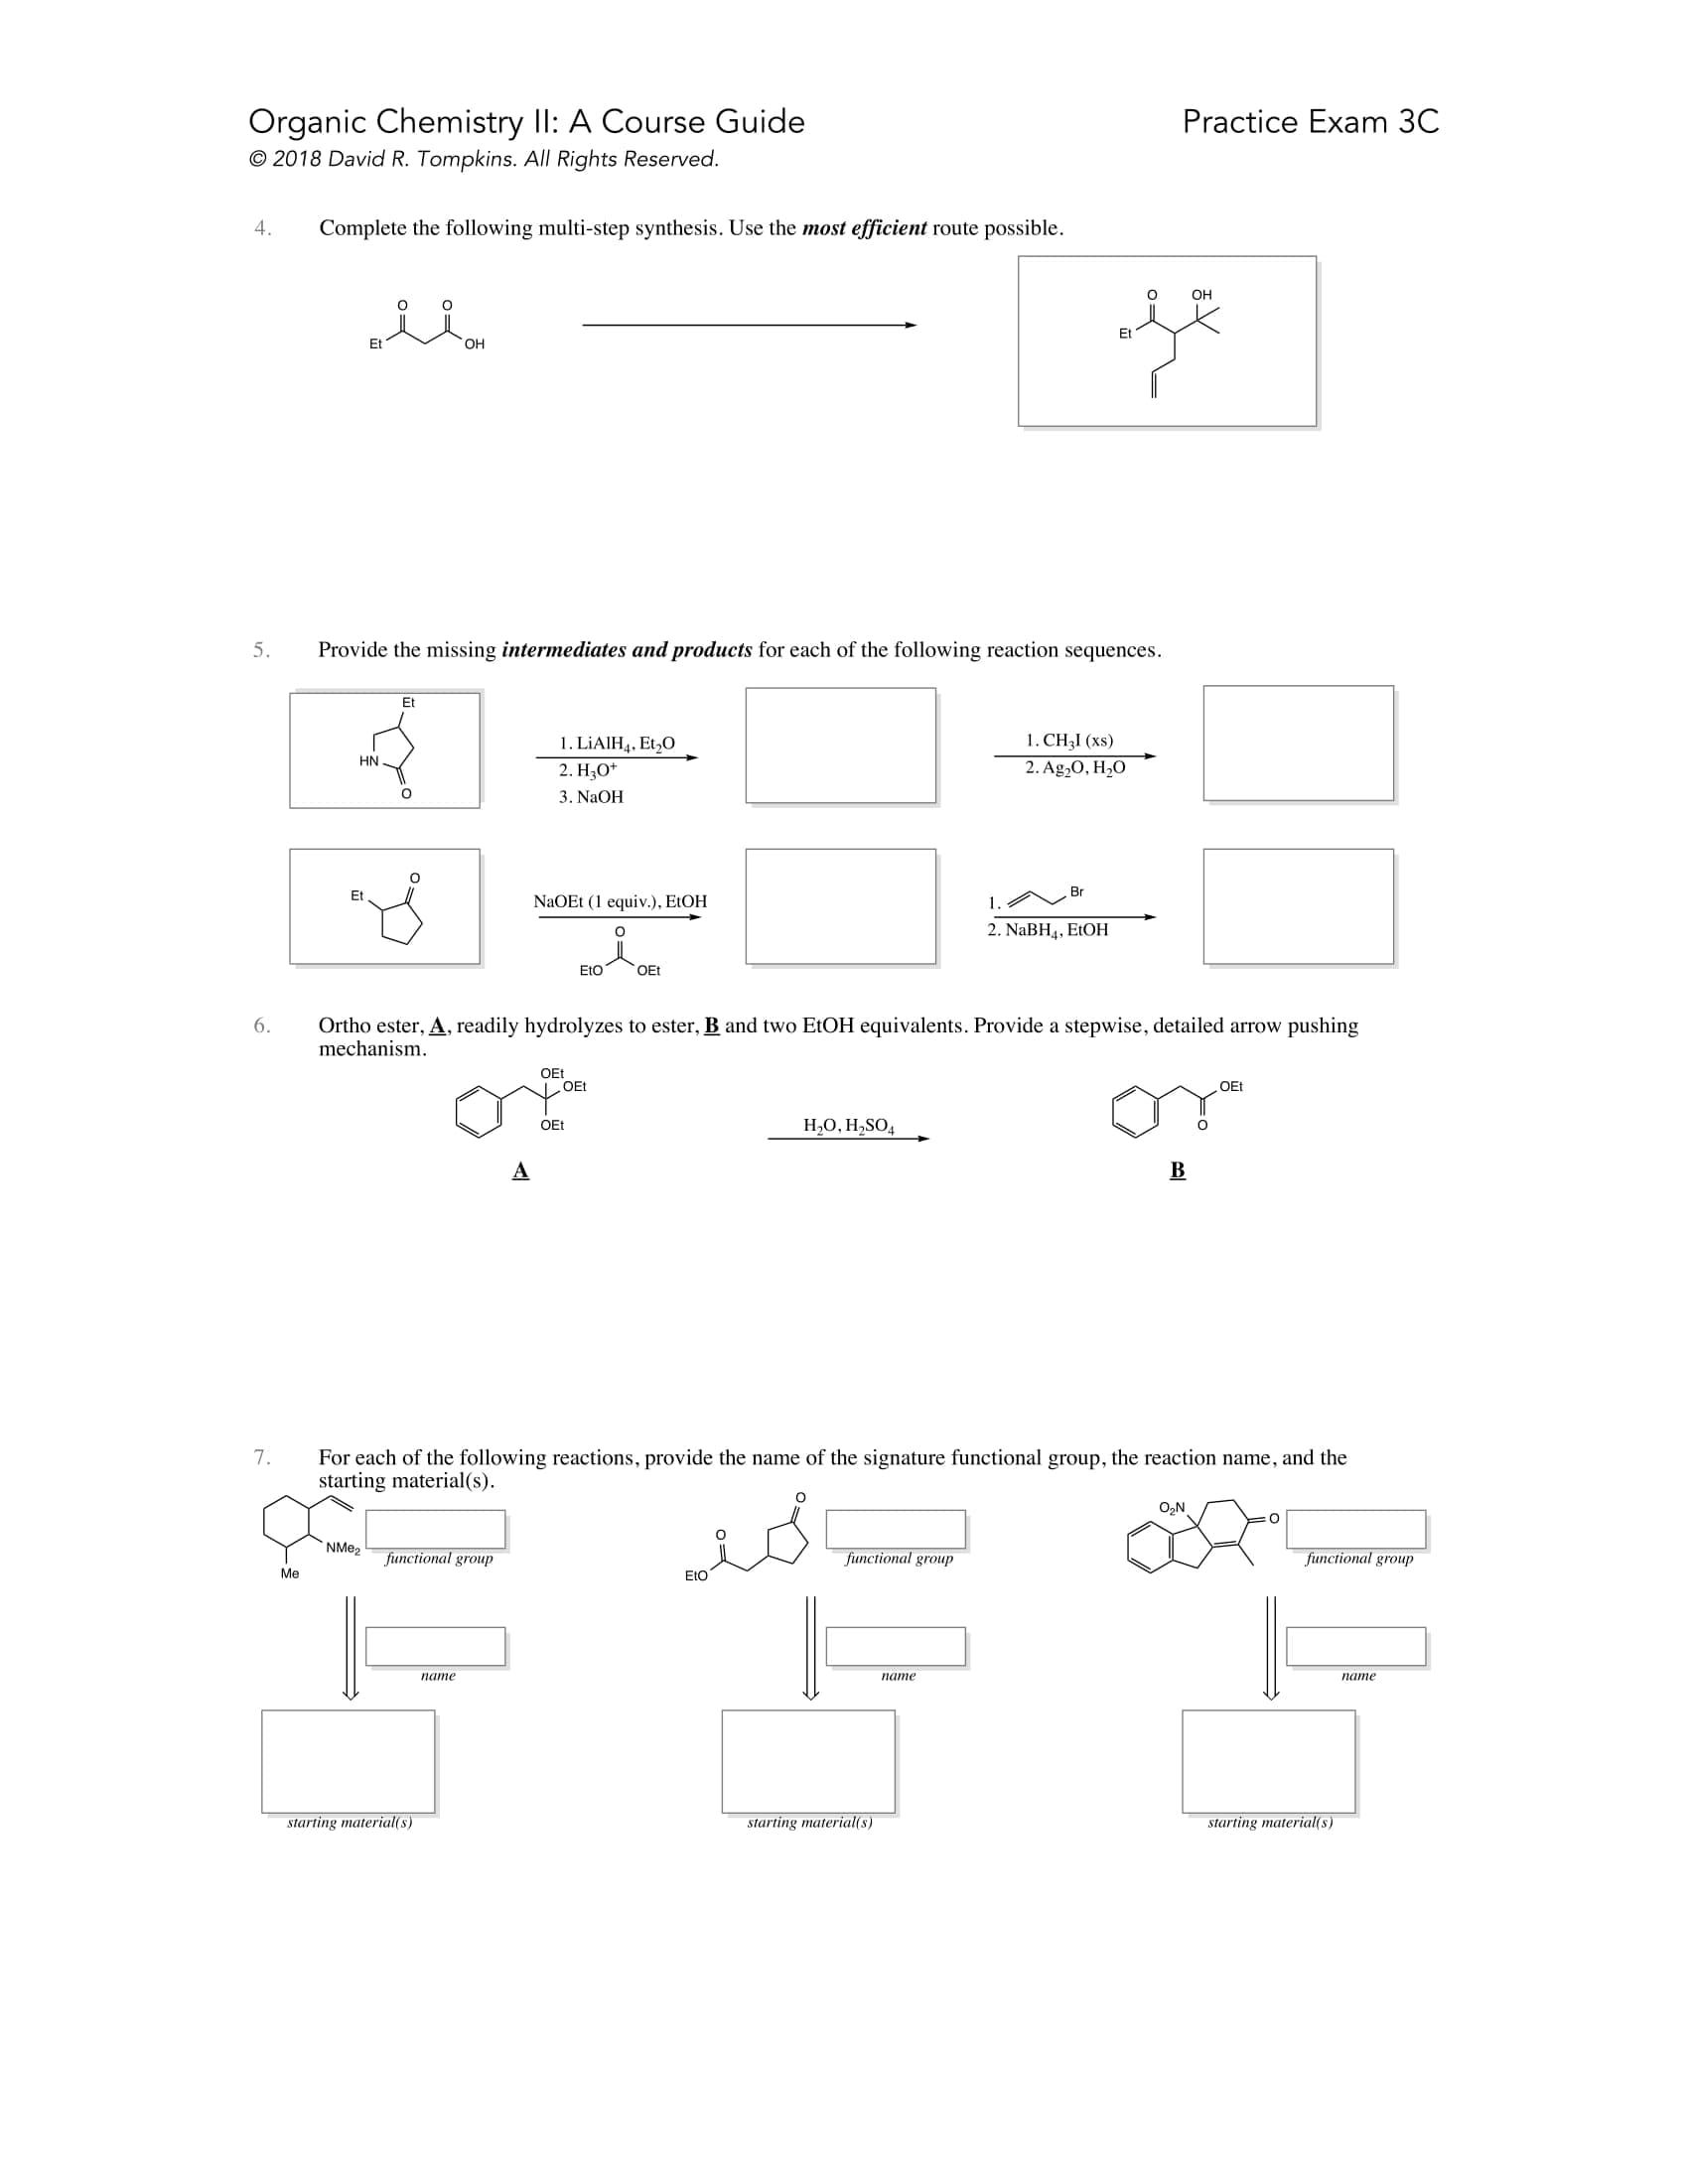 Introduction to Organic II Chemistry (Duke) Course Guide Example Page 5